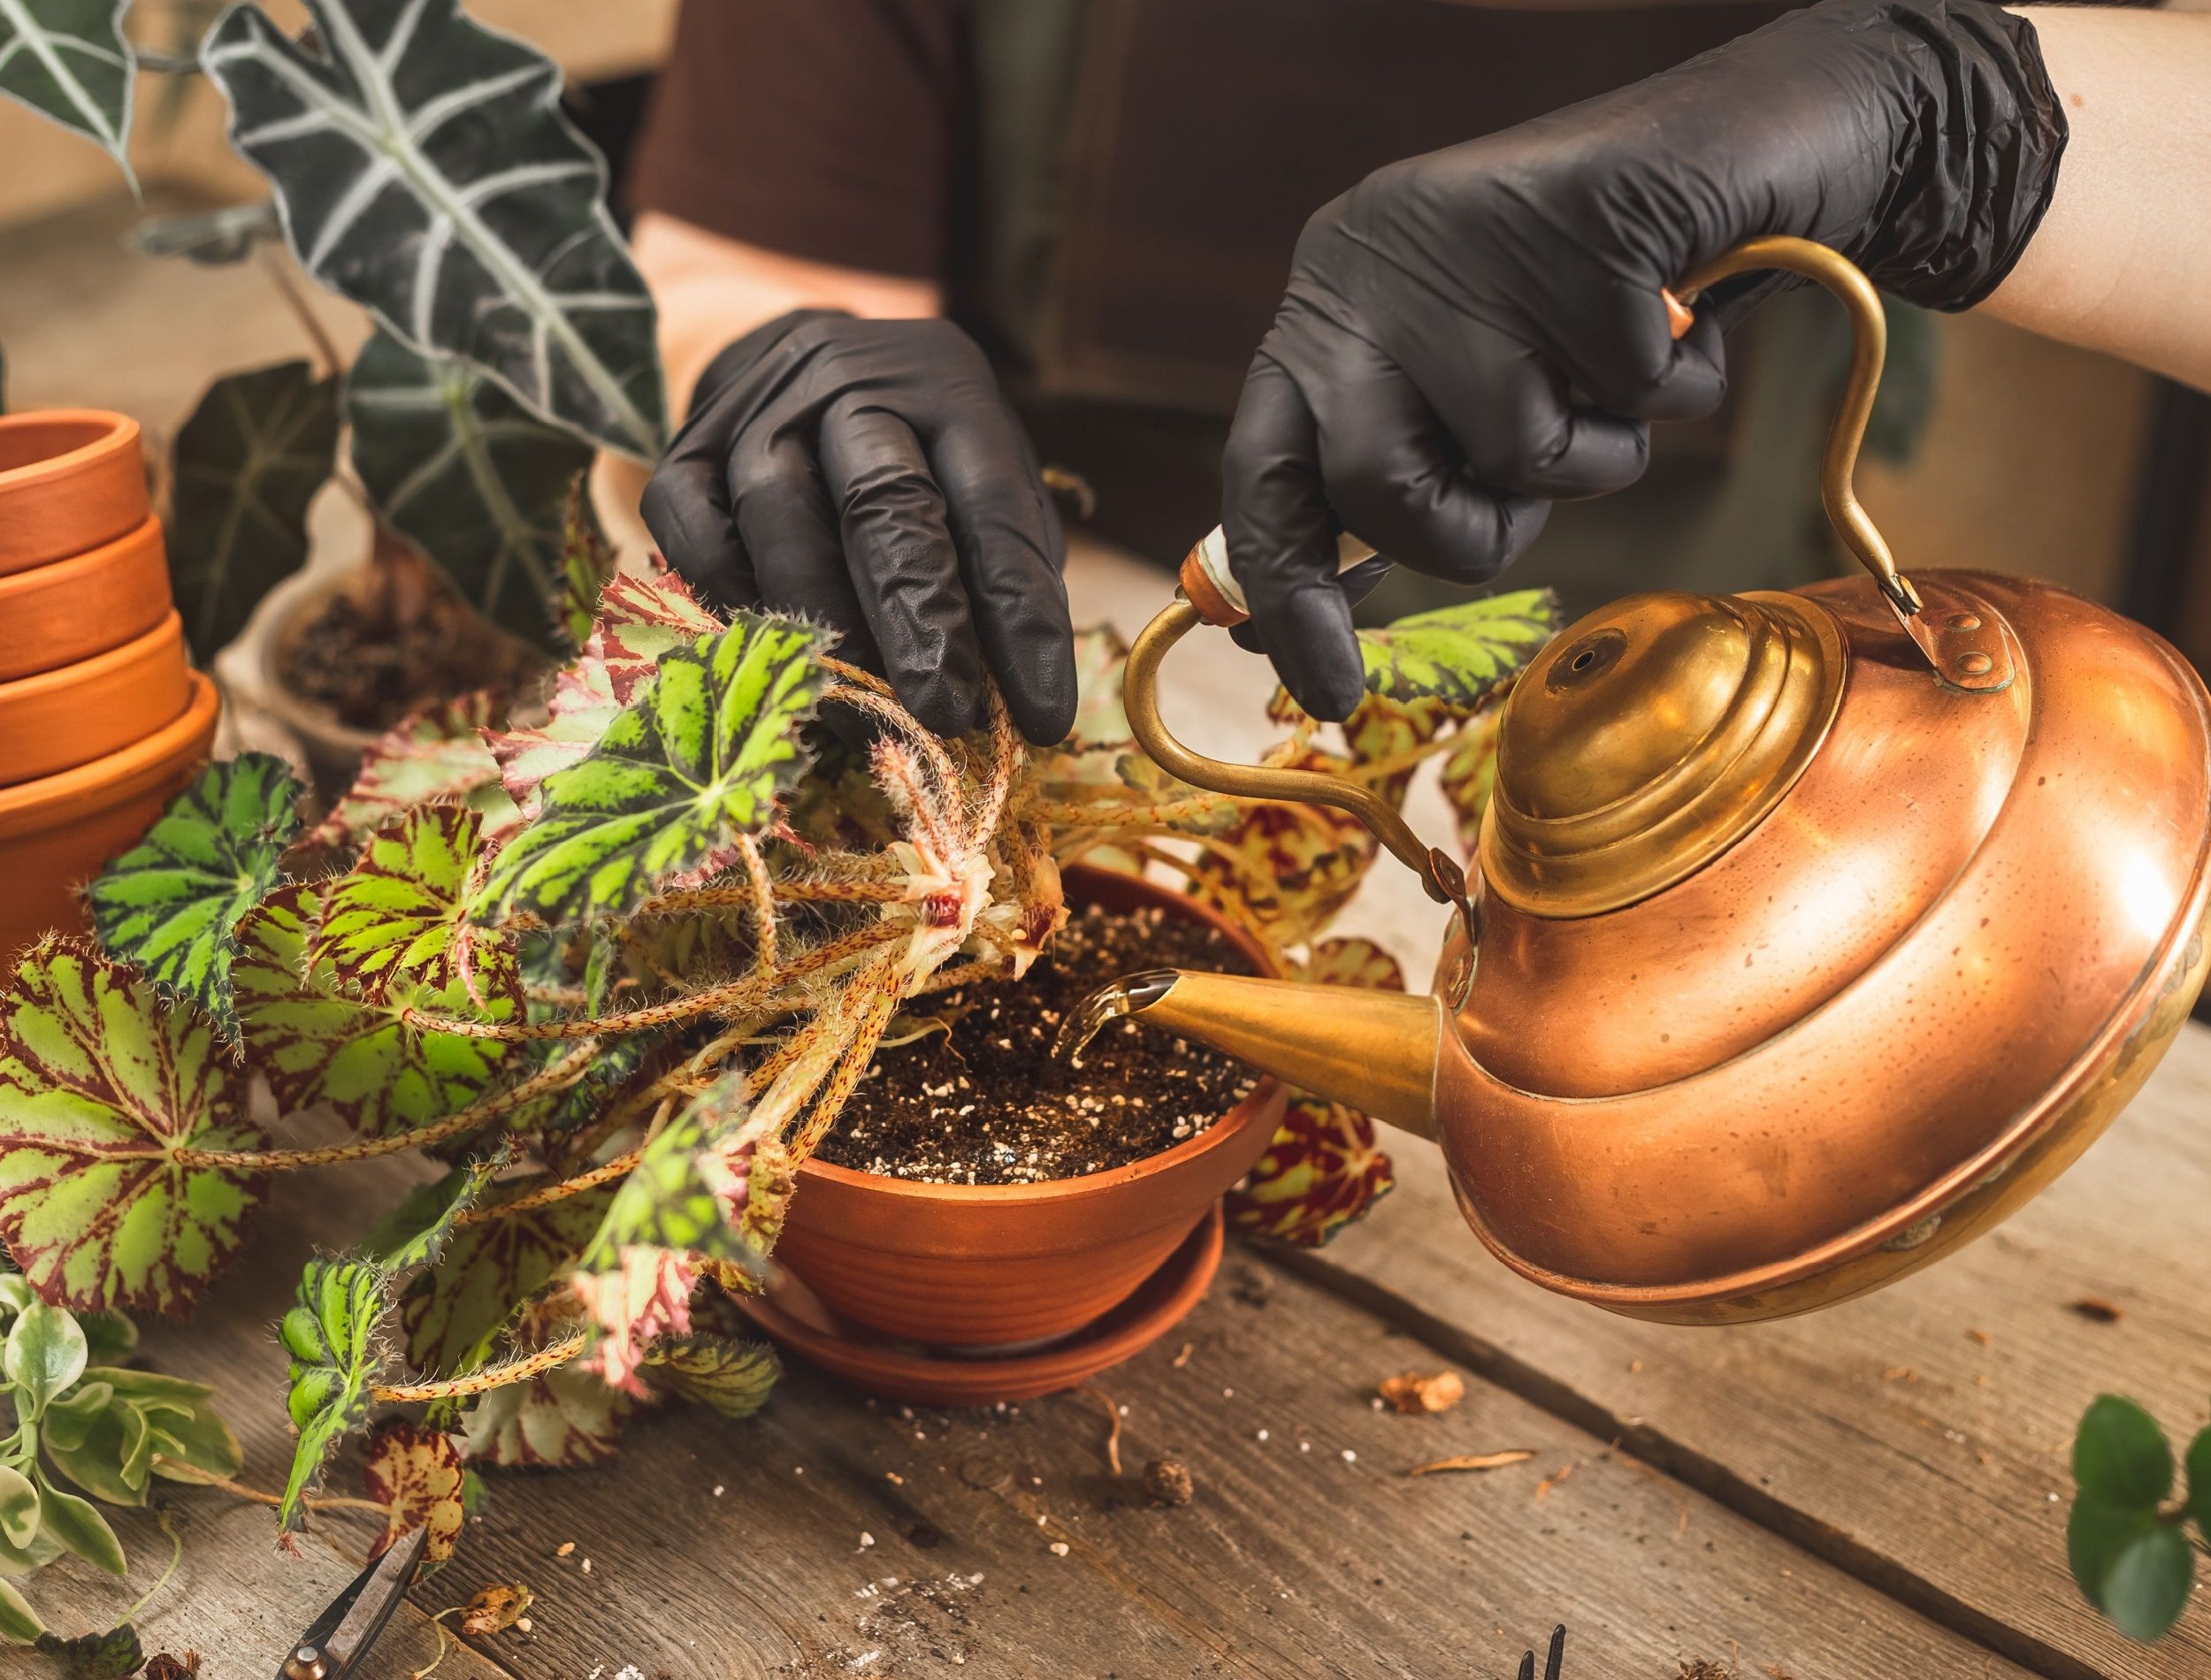 Female gardener wearing black rubber protective gloves watering indoor plant after repot using a copper vintage teapot. Growing plants at home or greenhouse business